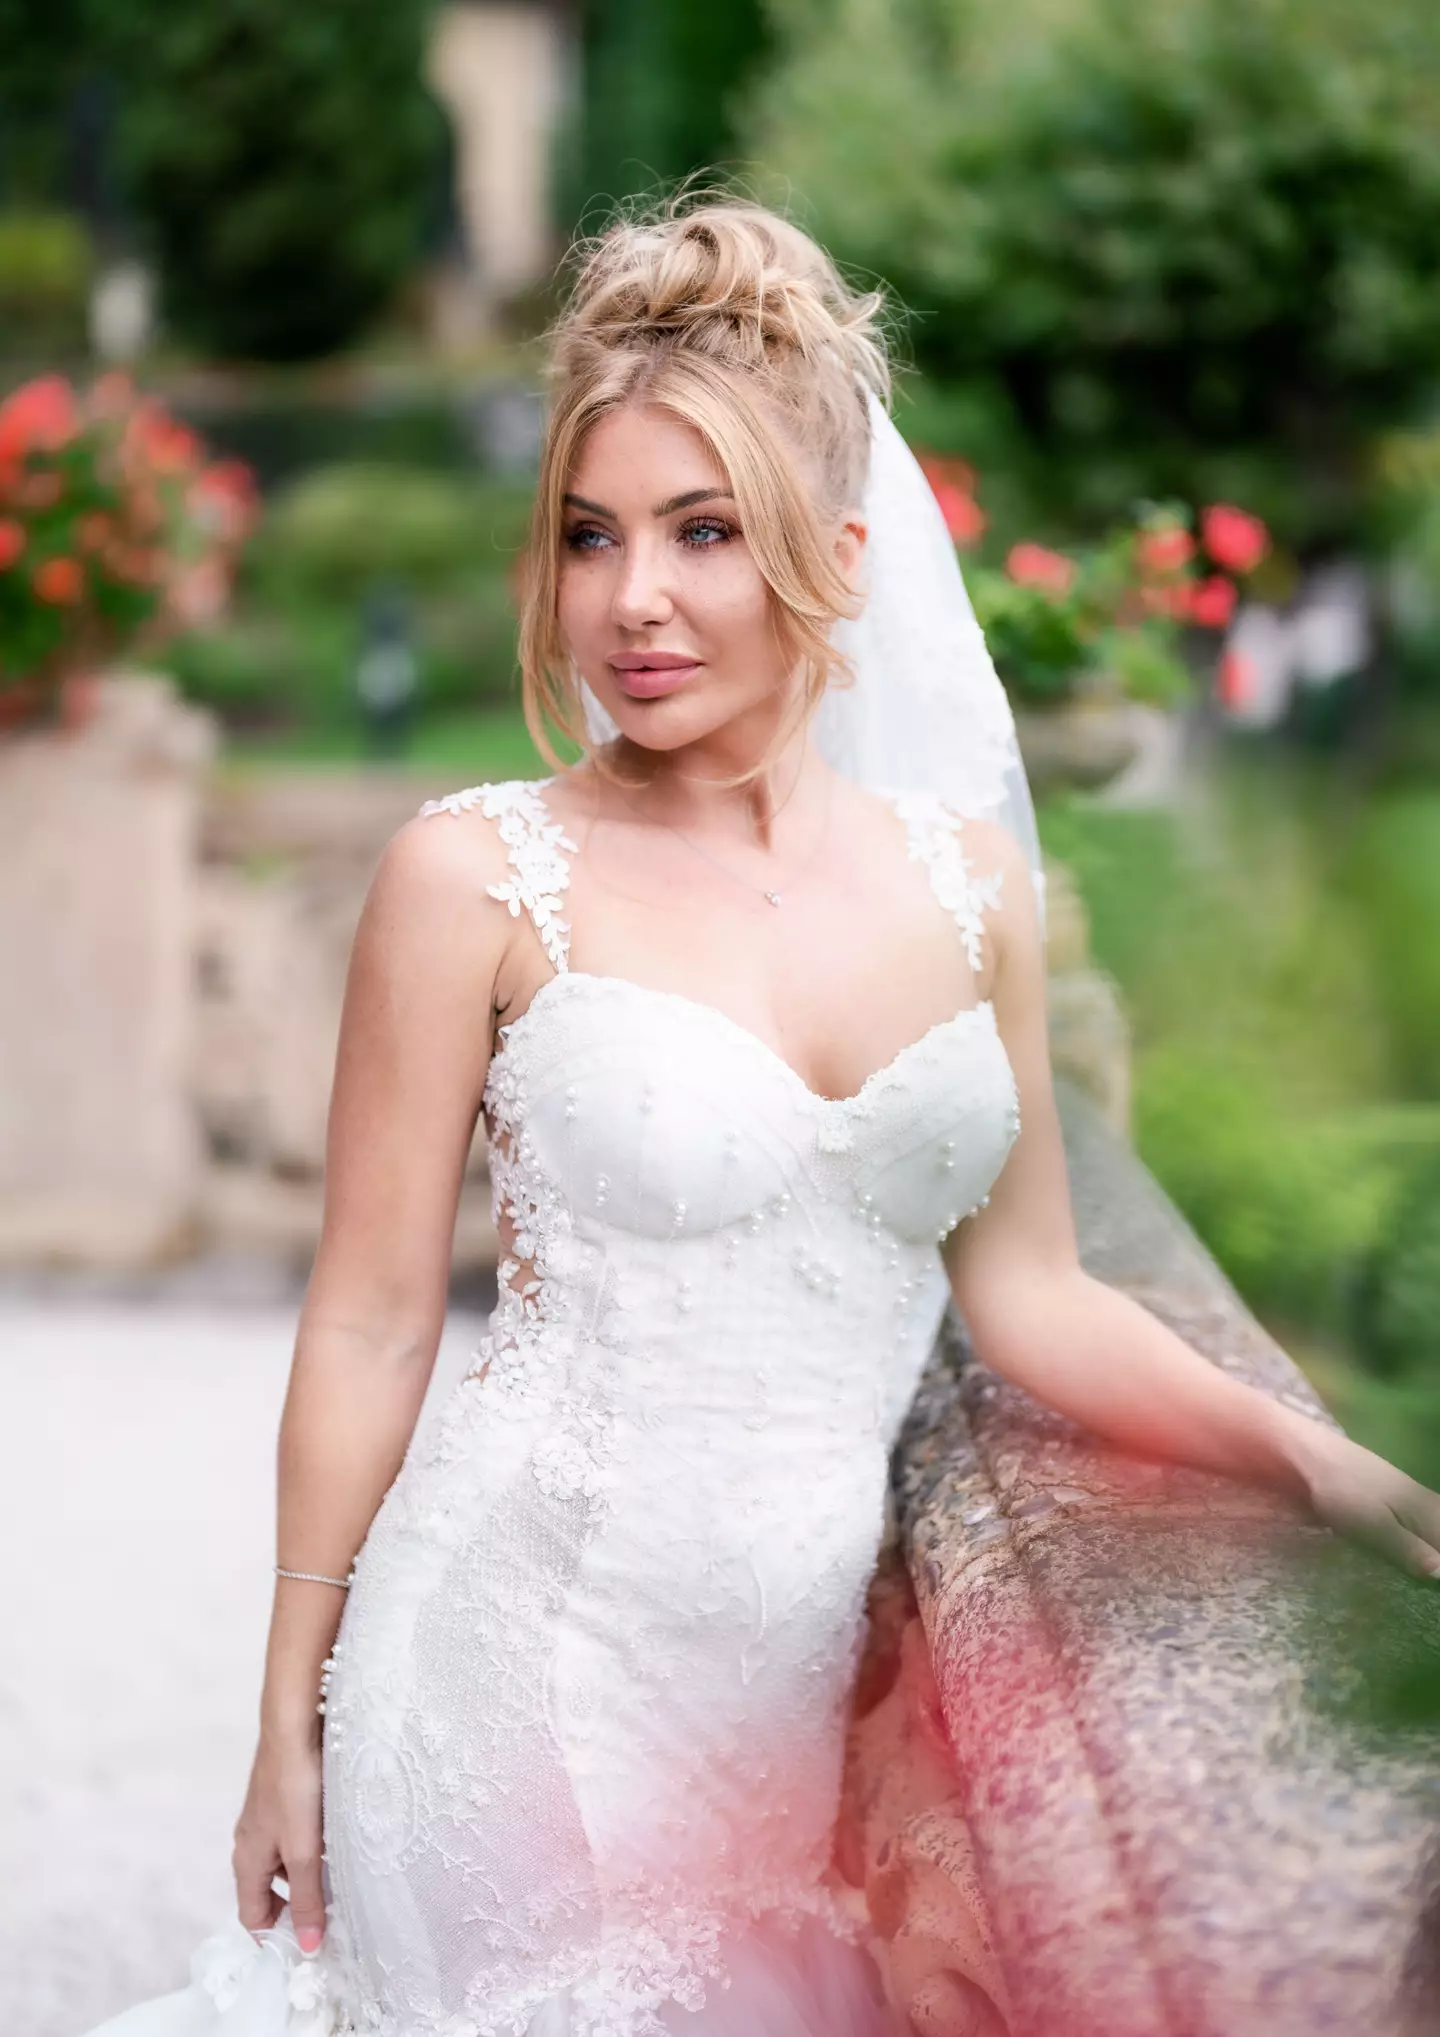 This bride spent a whopping £300,000 on her wedding.